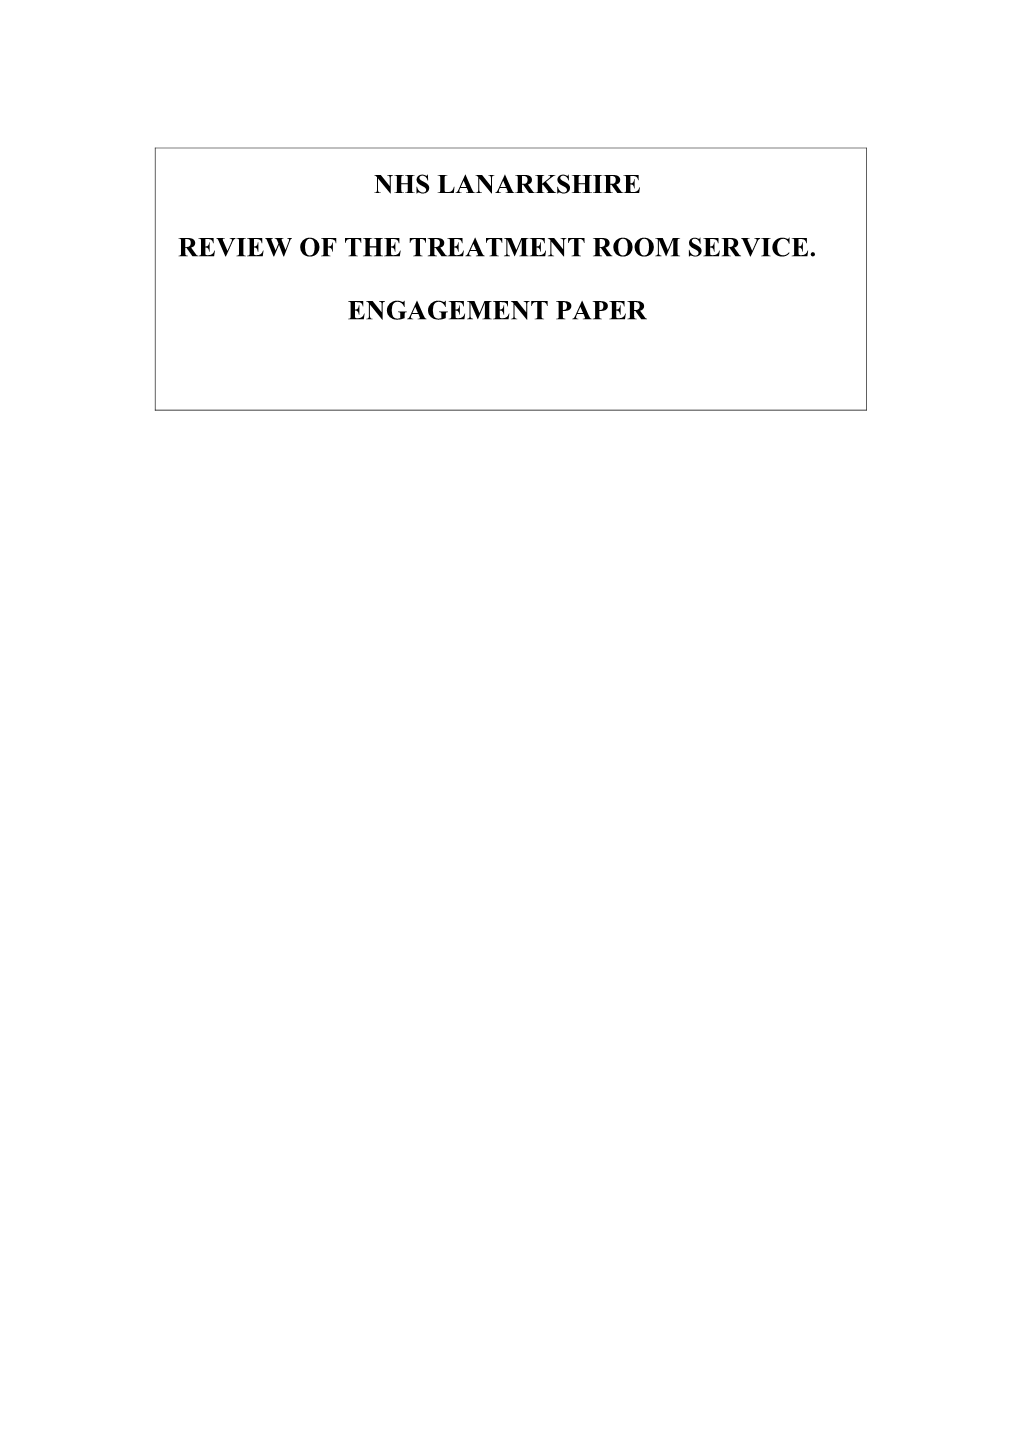 Treatment Room Engagement Paper - May 2011